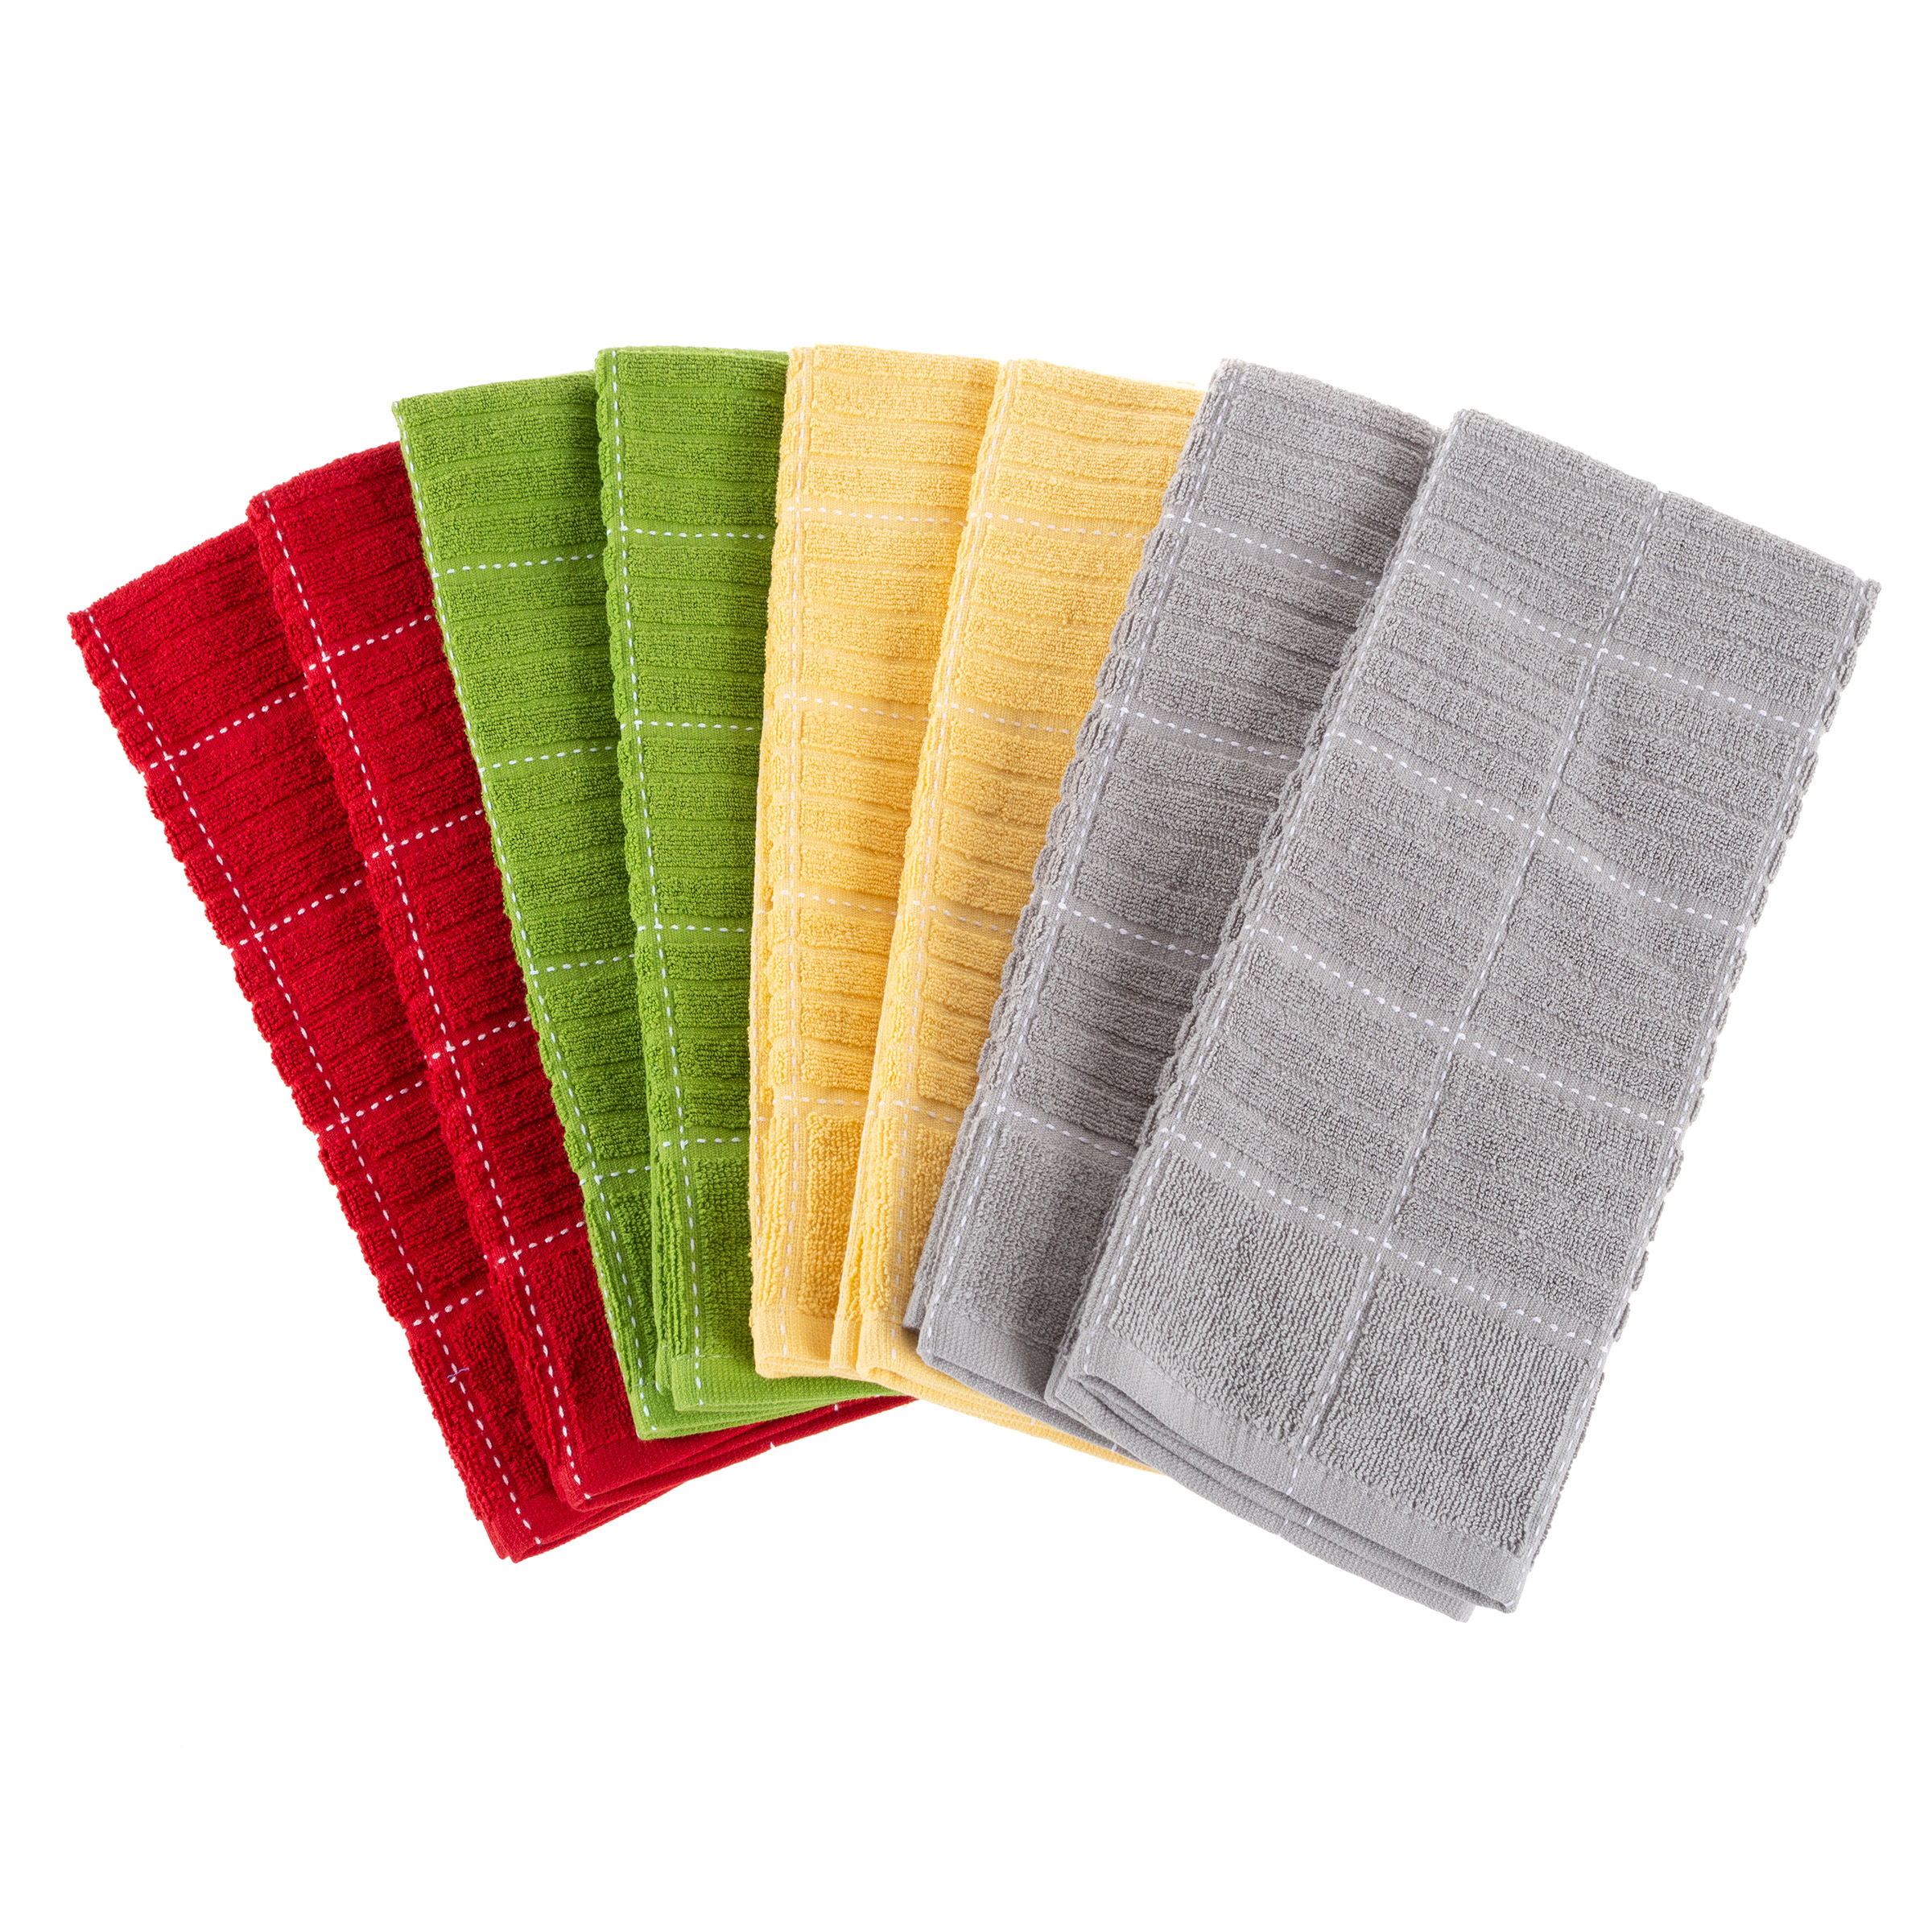 100% Cotton Dish Cloth Wash Cloth Hand Towel Set Of 8 Or 16 Kitchen Bathroom Linens Cleaning Bathing - 16 Pack Of Washclothes Or Dish Clothe